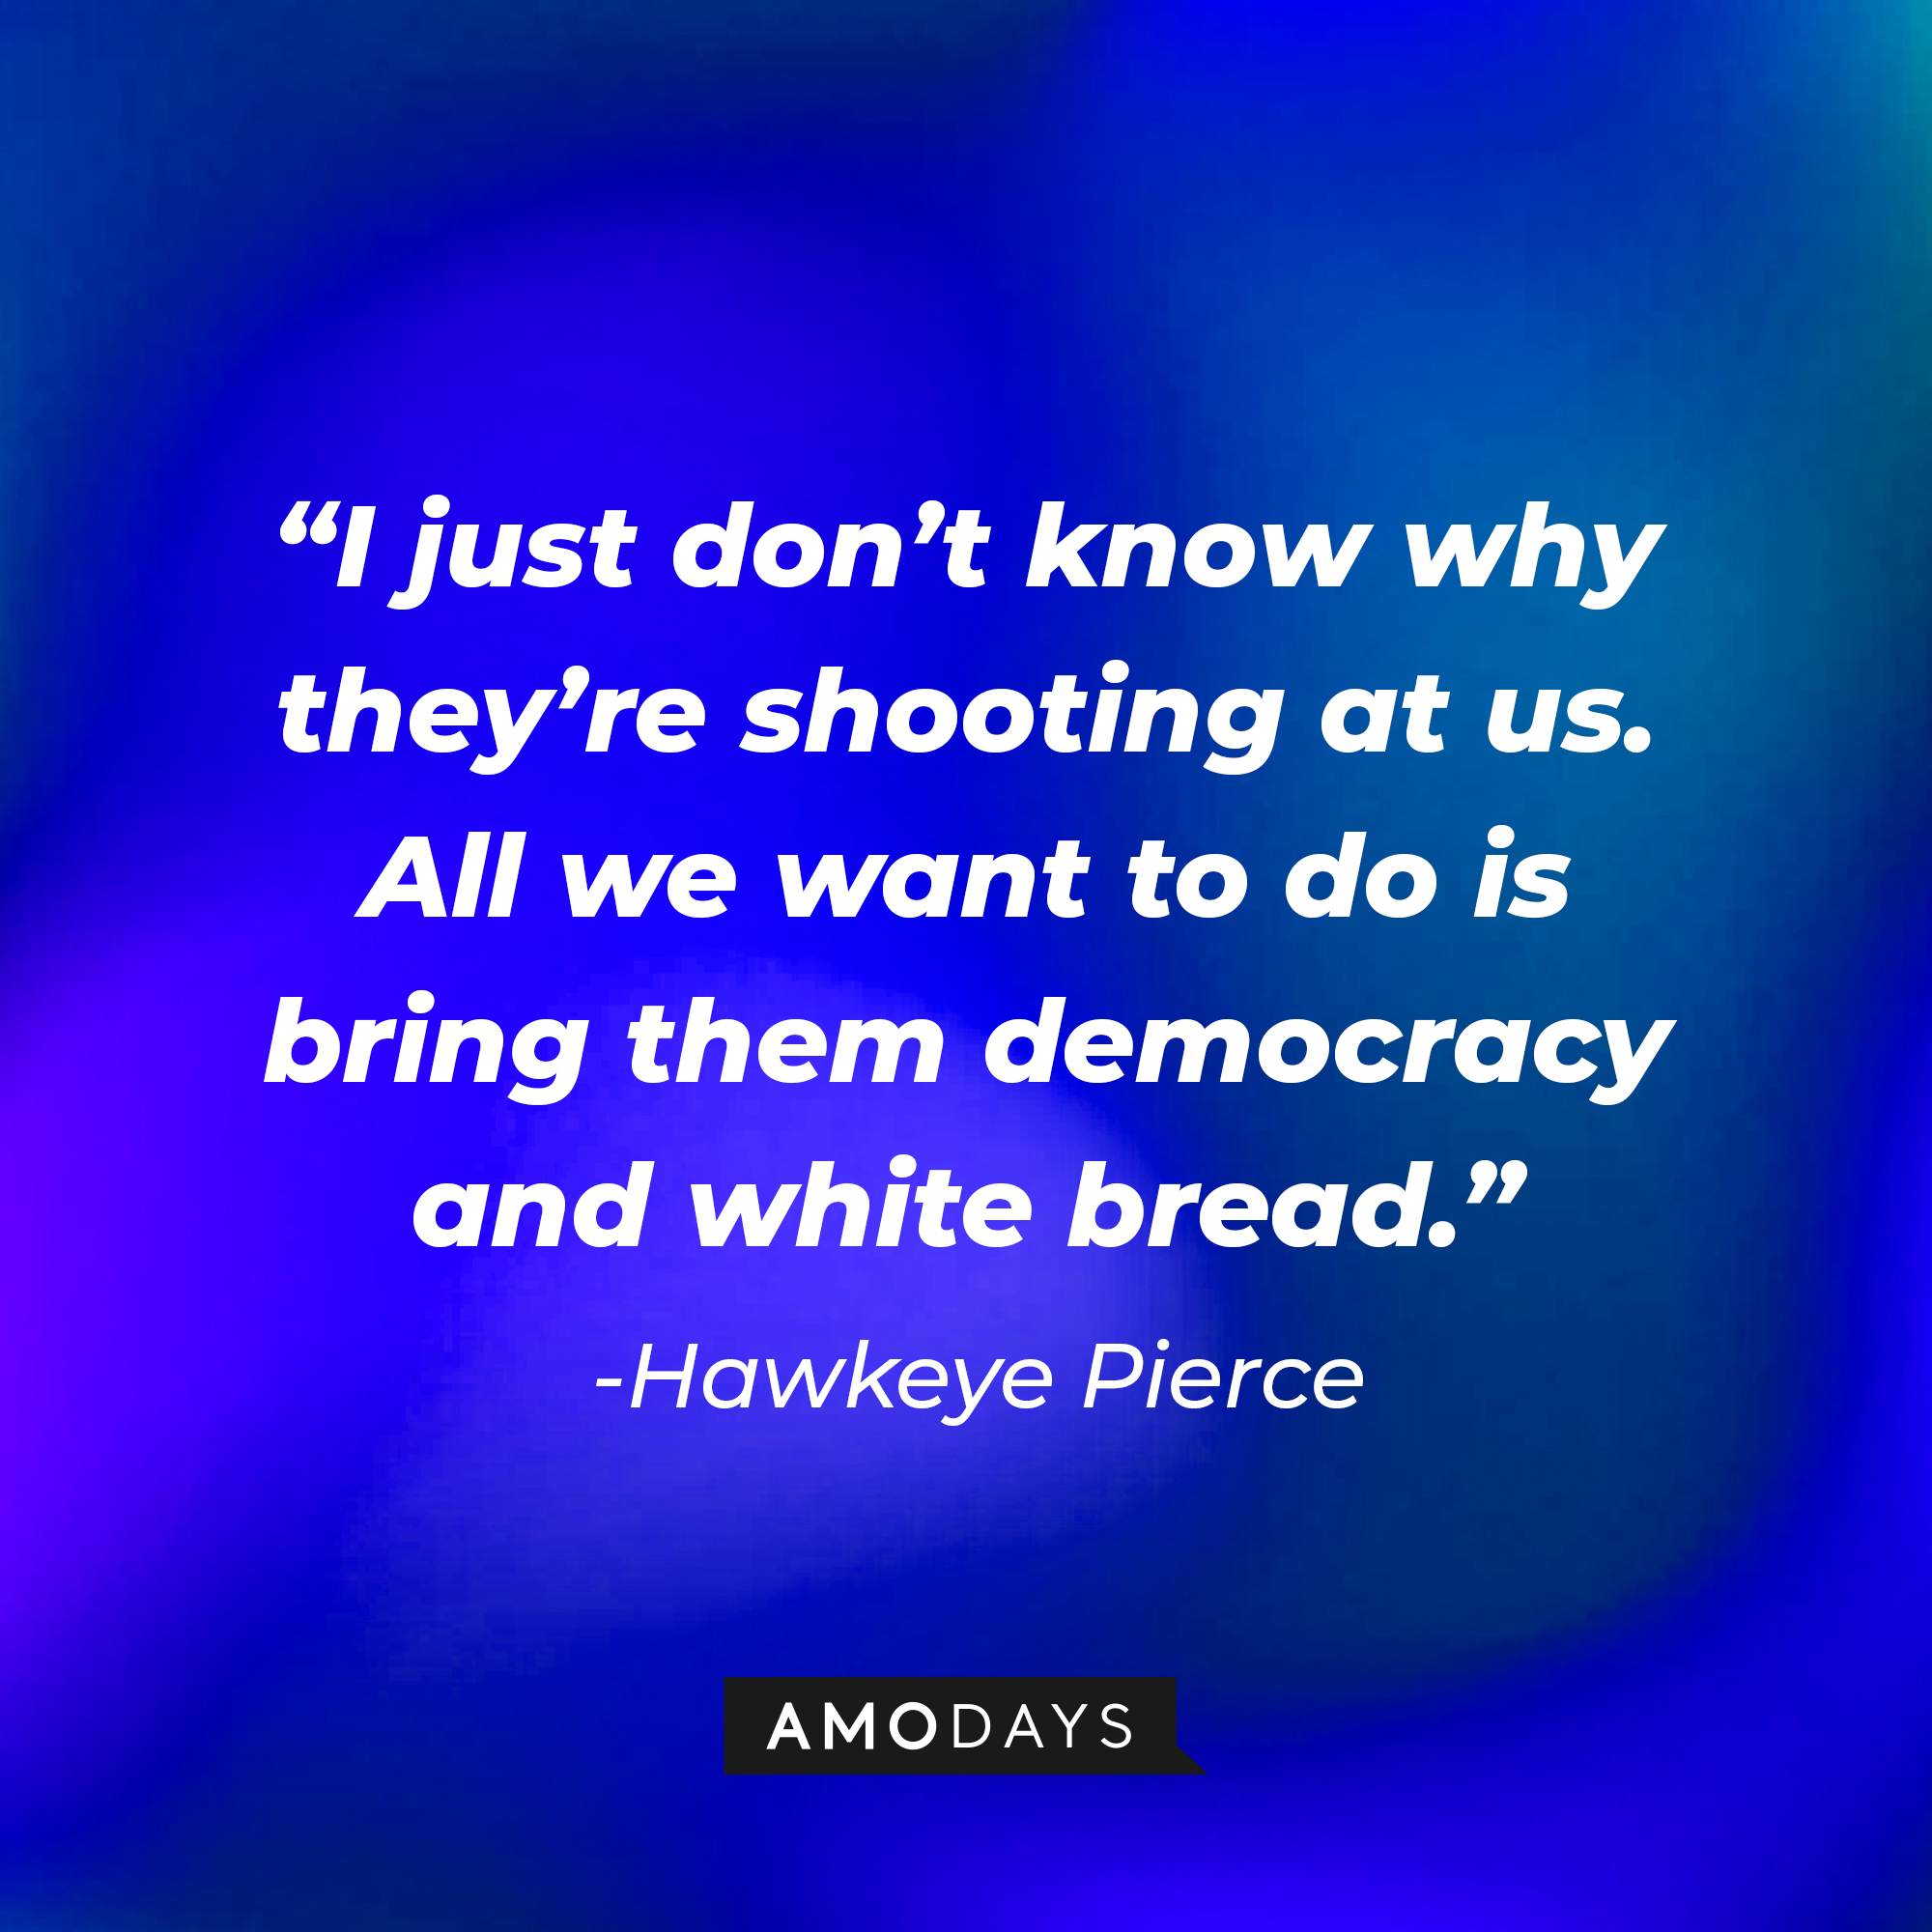 Hawkeye Pierce’s quote: “I just don’t know why they’re shooting at us. All we want to do is bring them democracy and white bread.” | Source: AmoDays